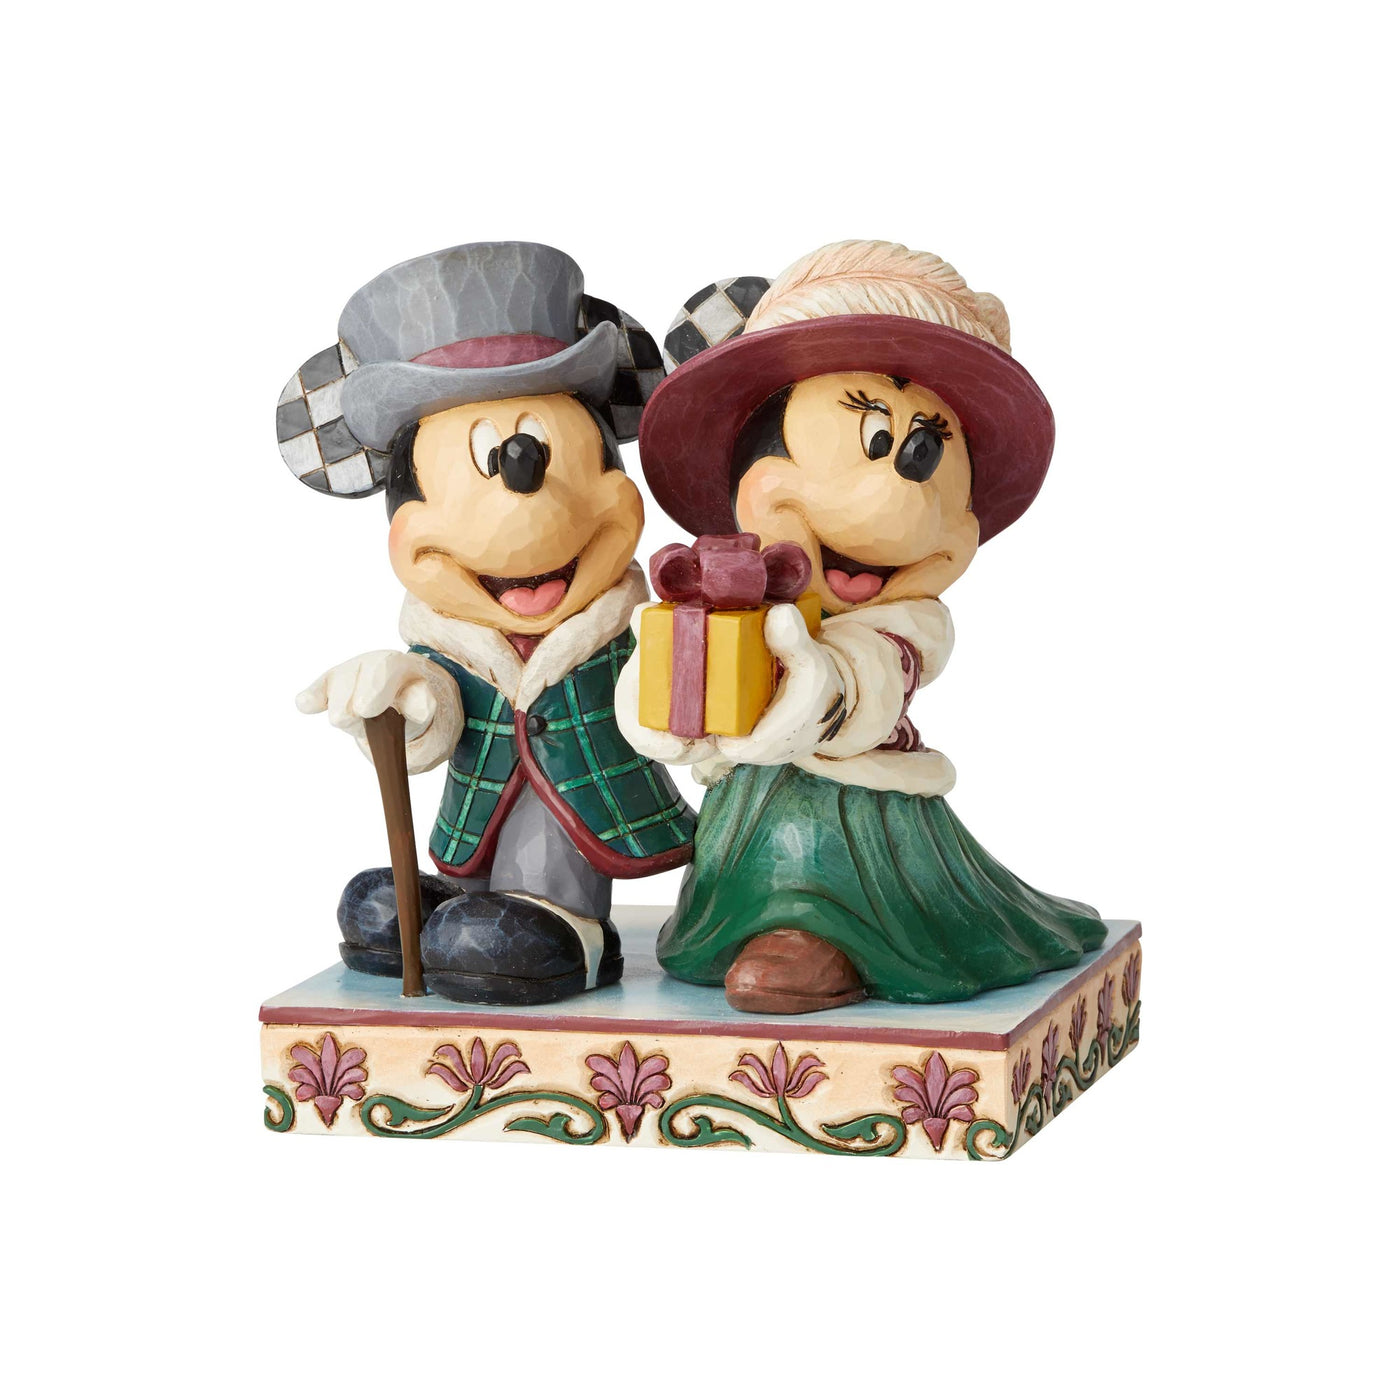 Jim Shore Disney Traditions Mickey and Minnie Victorian Figurine New with Box